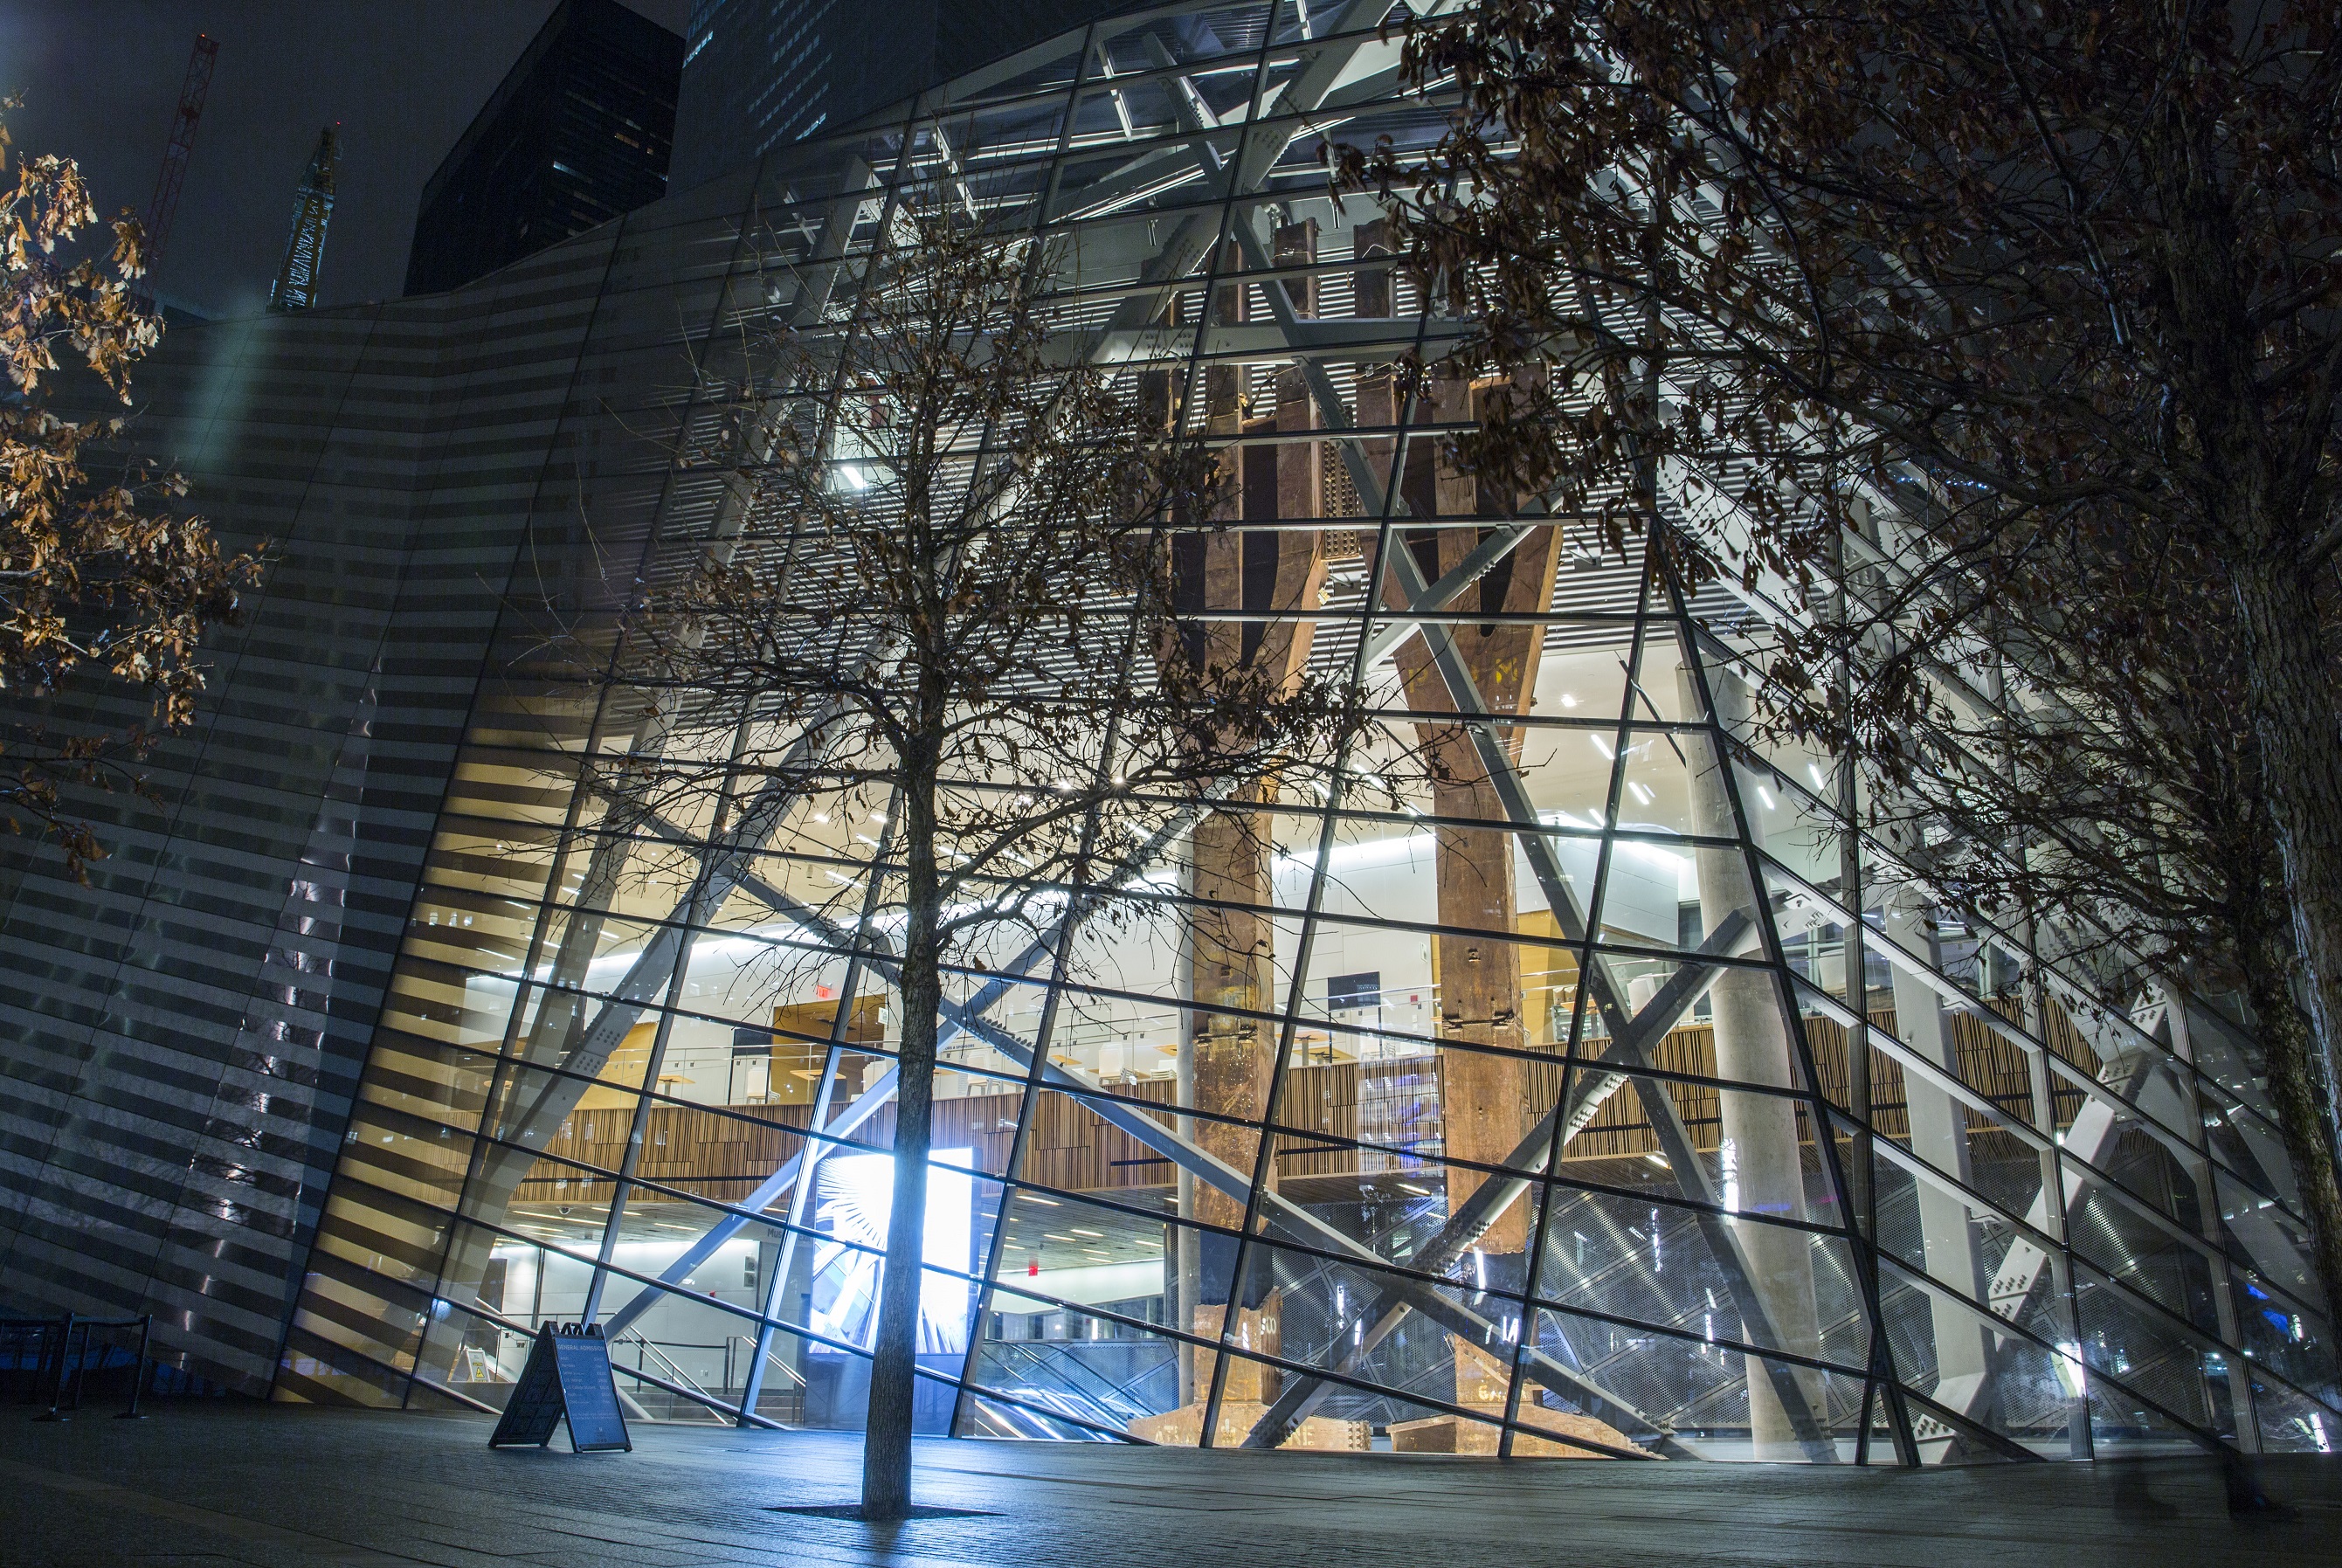 The interior of the Museum pavilion can be seen illuminated at night from outside on Memorial plaza. The steel tridents from the Twin Towers can be seen through the glass of the pavilion.